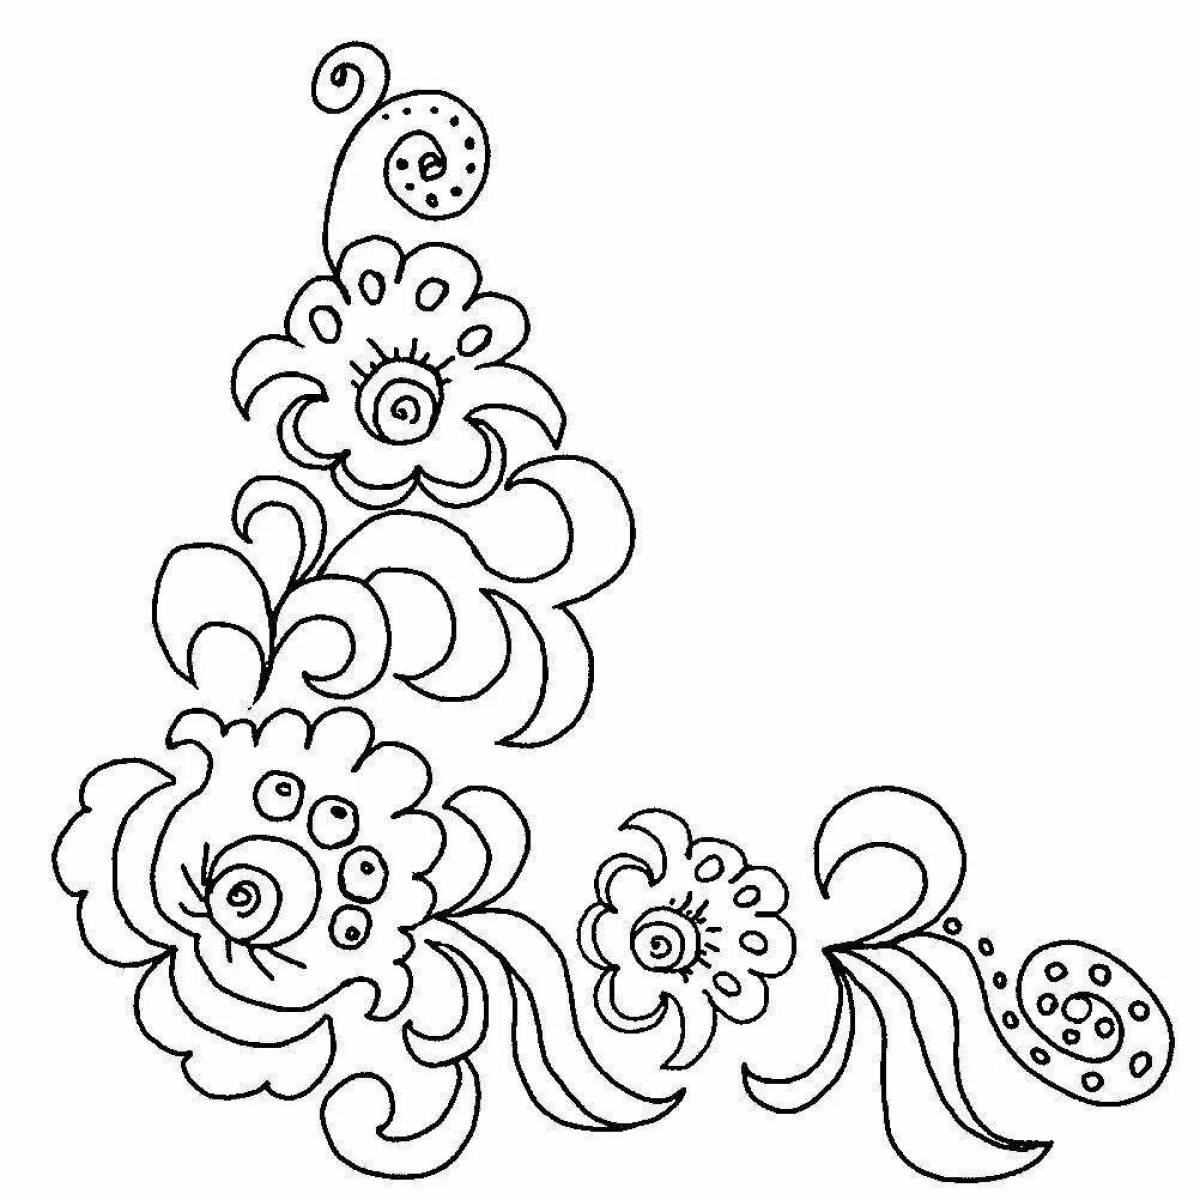 Coloring page graceful russian ornament